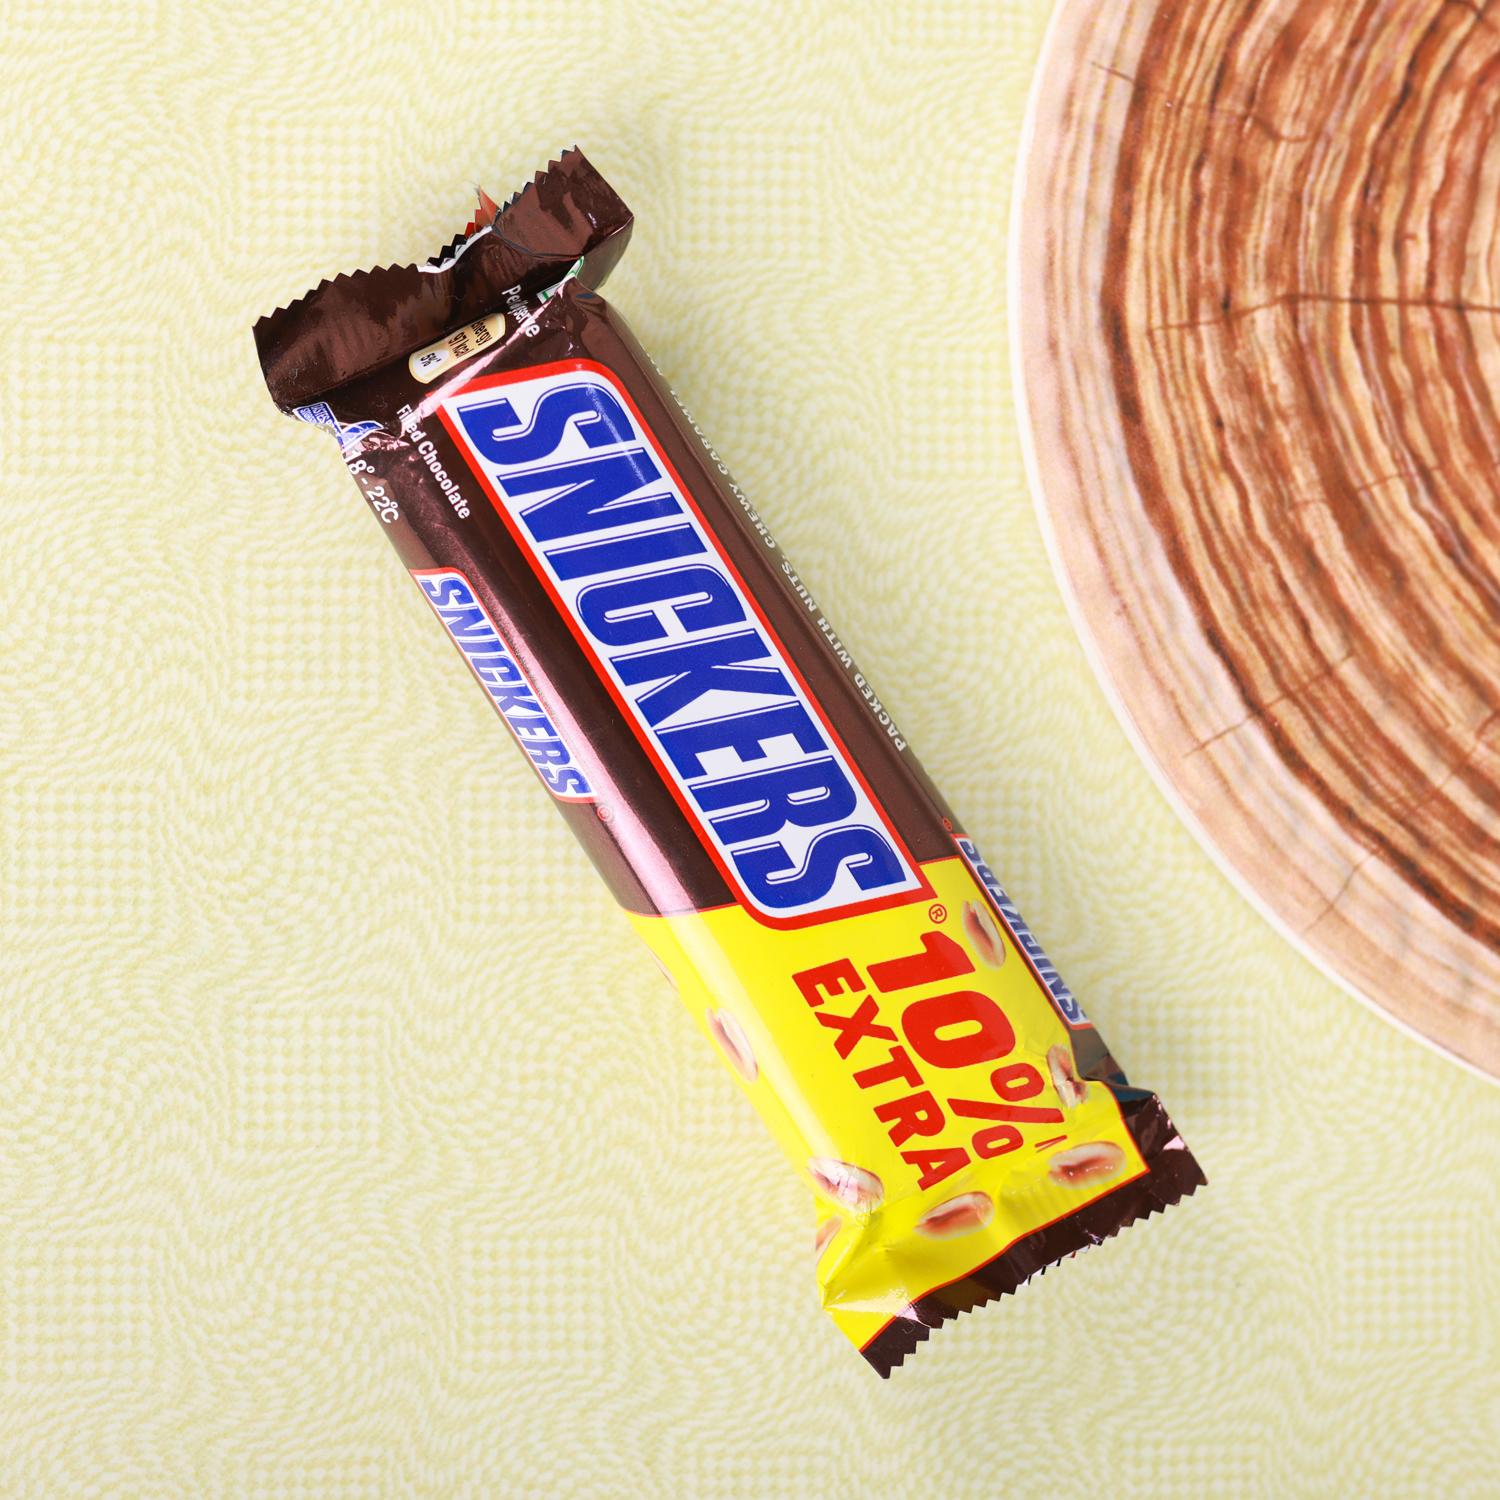 Buy Snickers Chocolate with Peanut Butter - 1 Piece Online - Shop Food  Cupboard on Carrefour Egypt